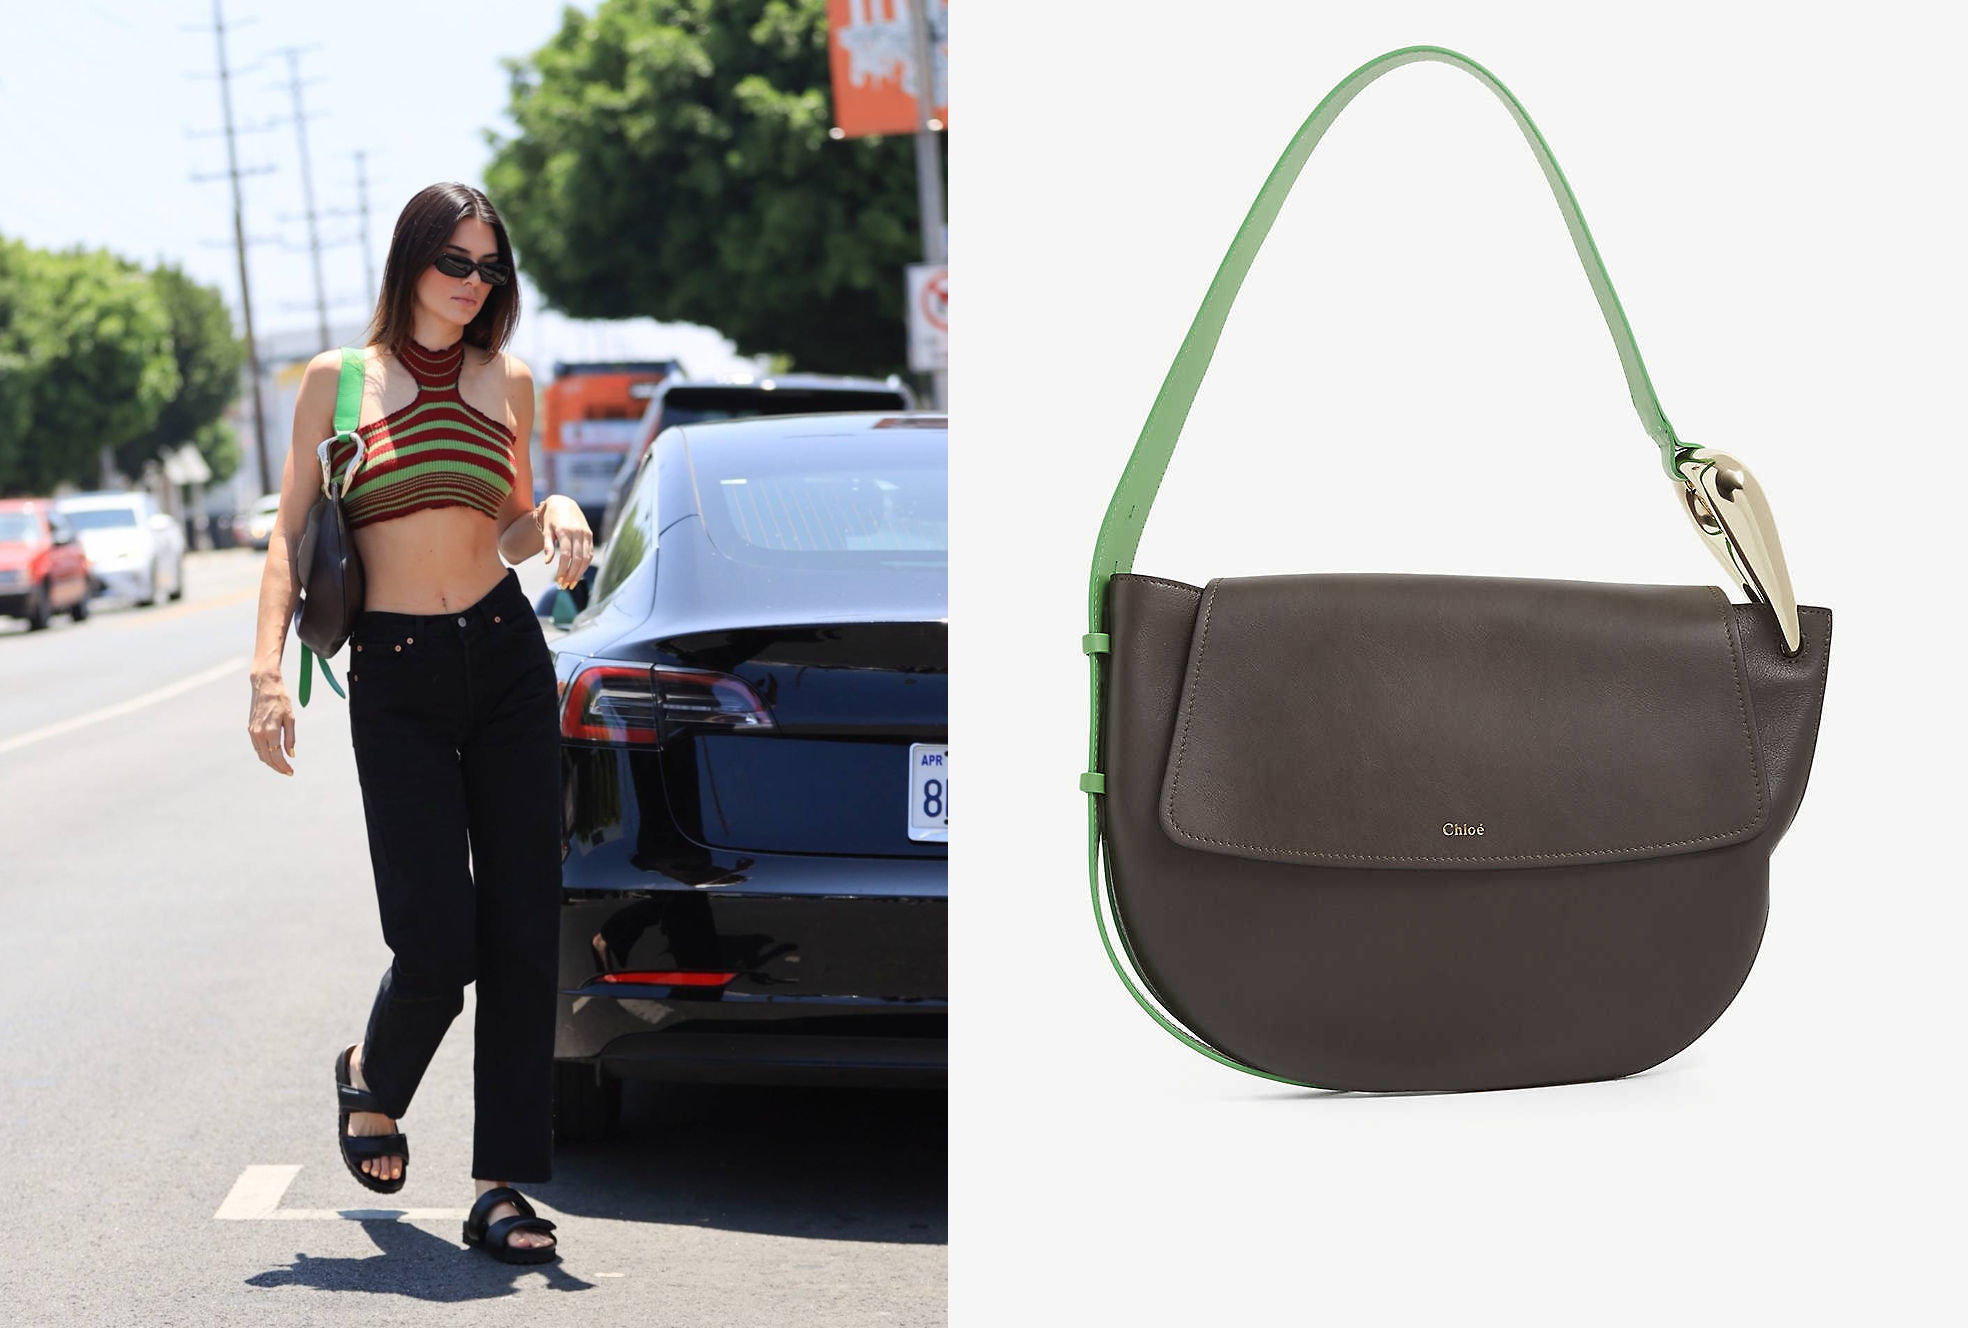 ELITIFY.COM - Kendall Jenner was recently spotted carrying the Chloé Mini  Crossbody Bag. Get the bag for yourself on